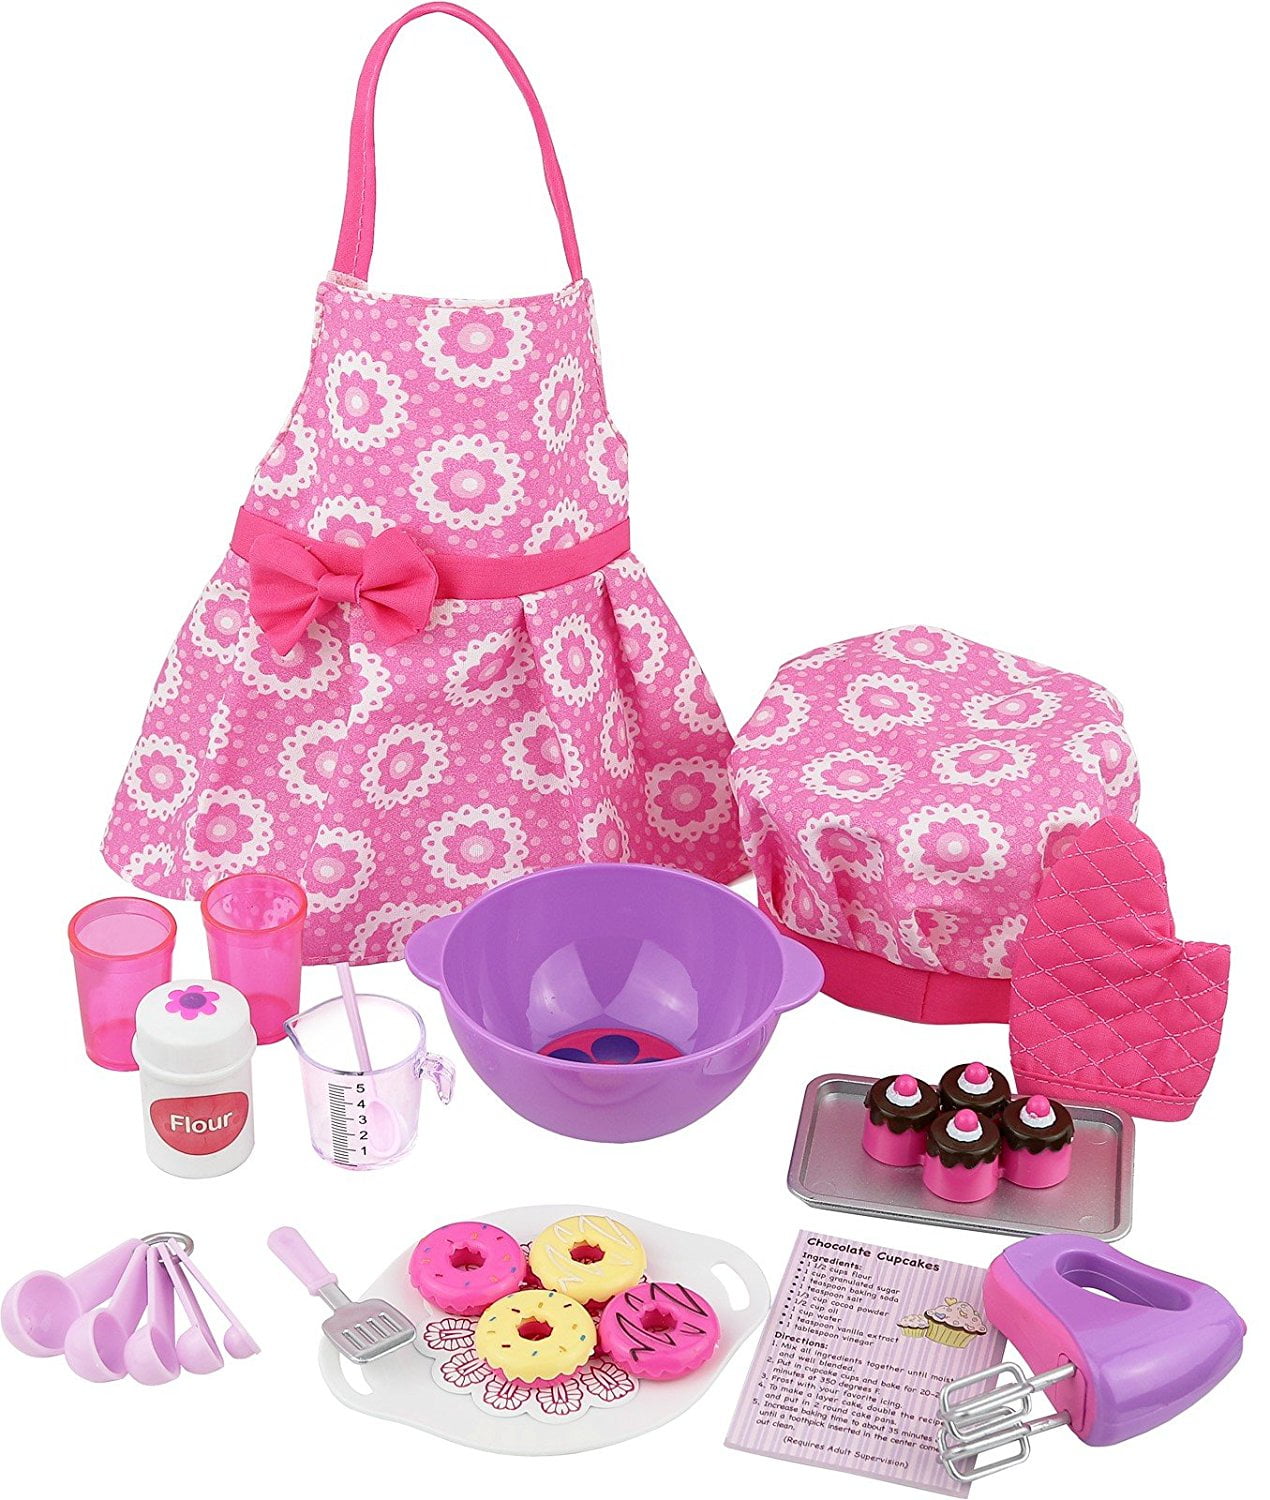 23 Piece Vintage Baking Tool Sets and Food-18-Inch Doll